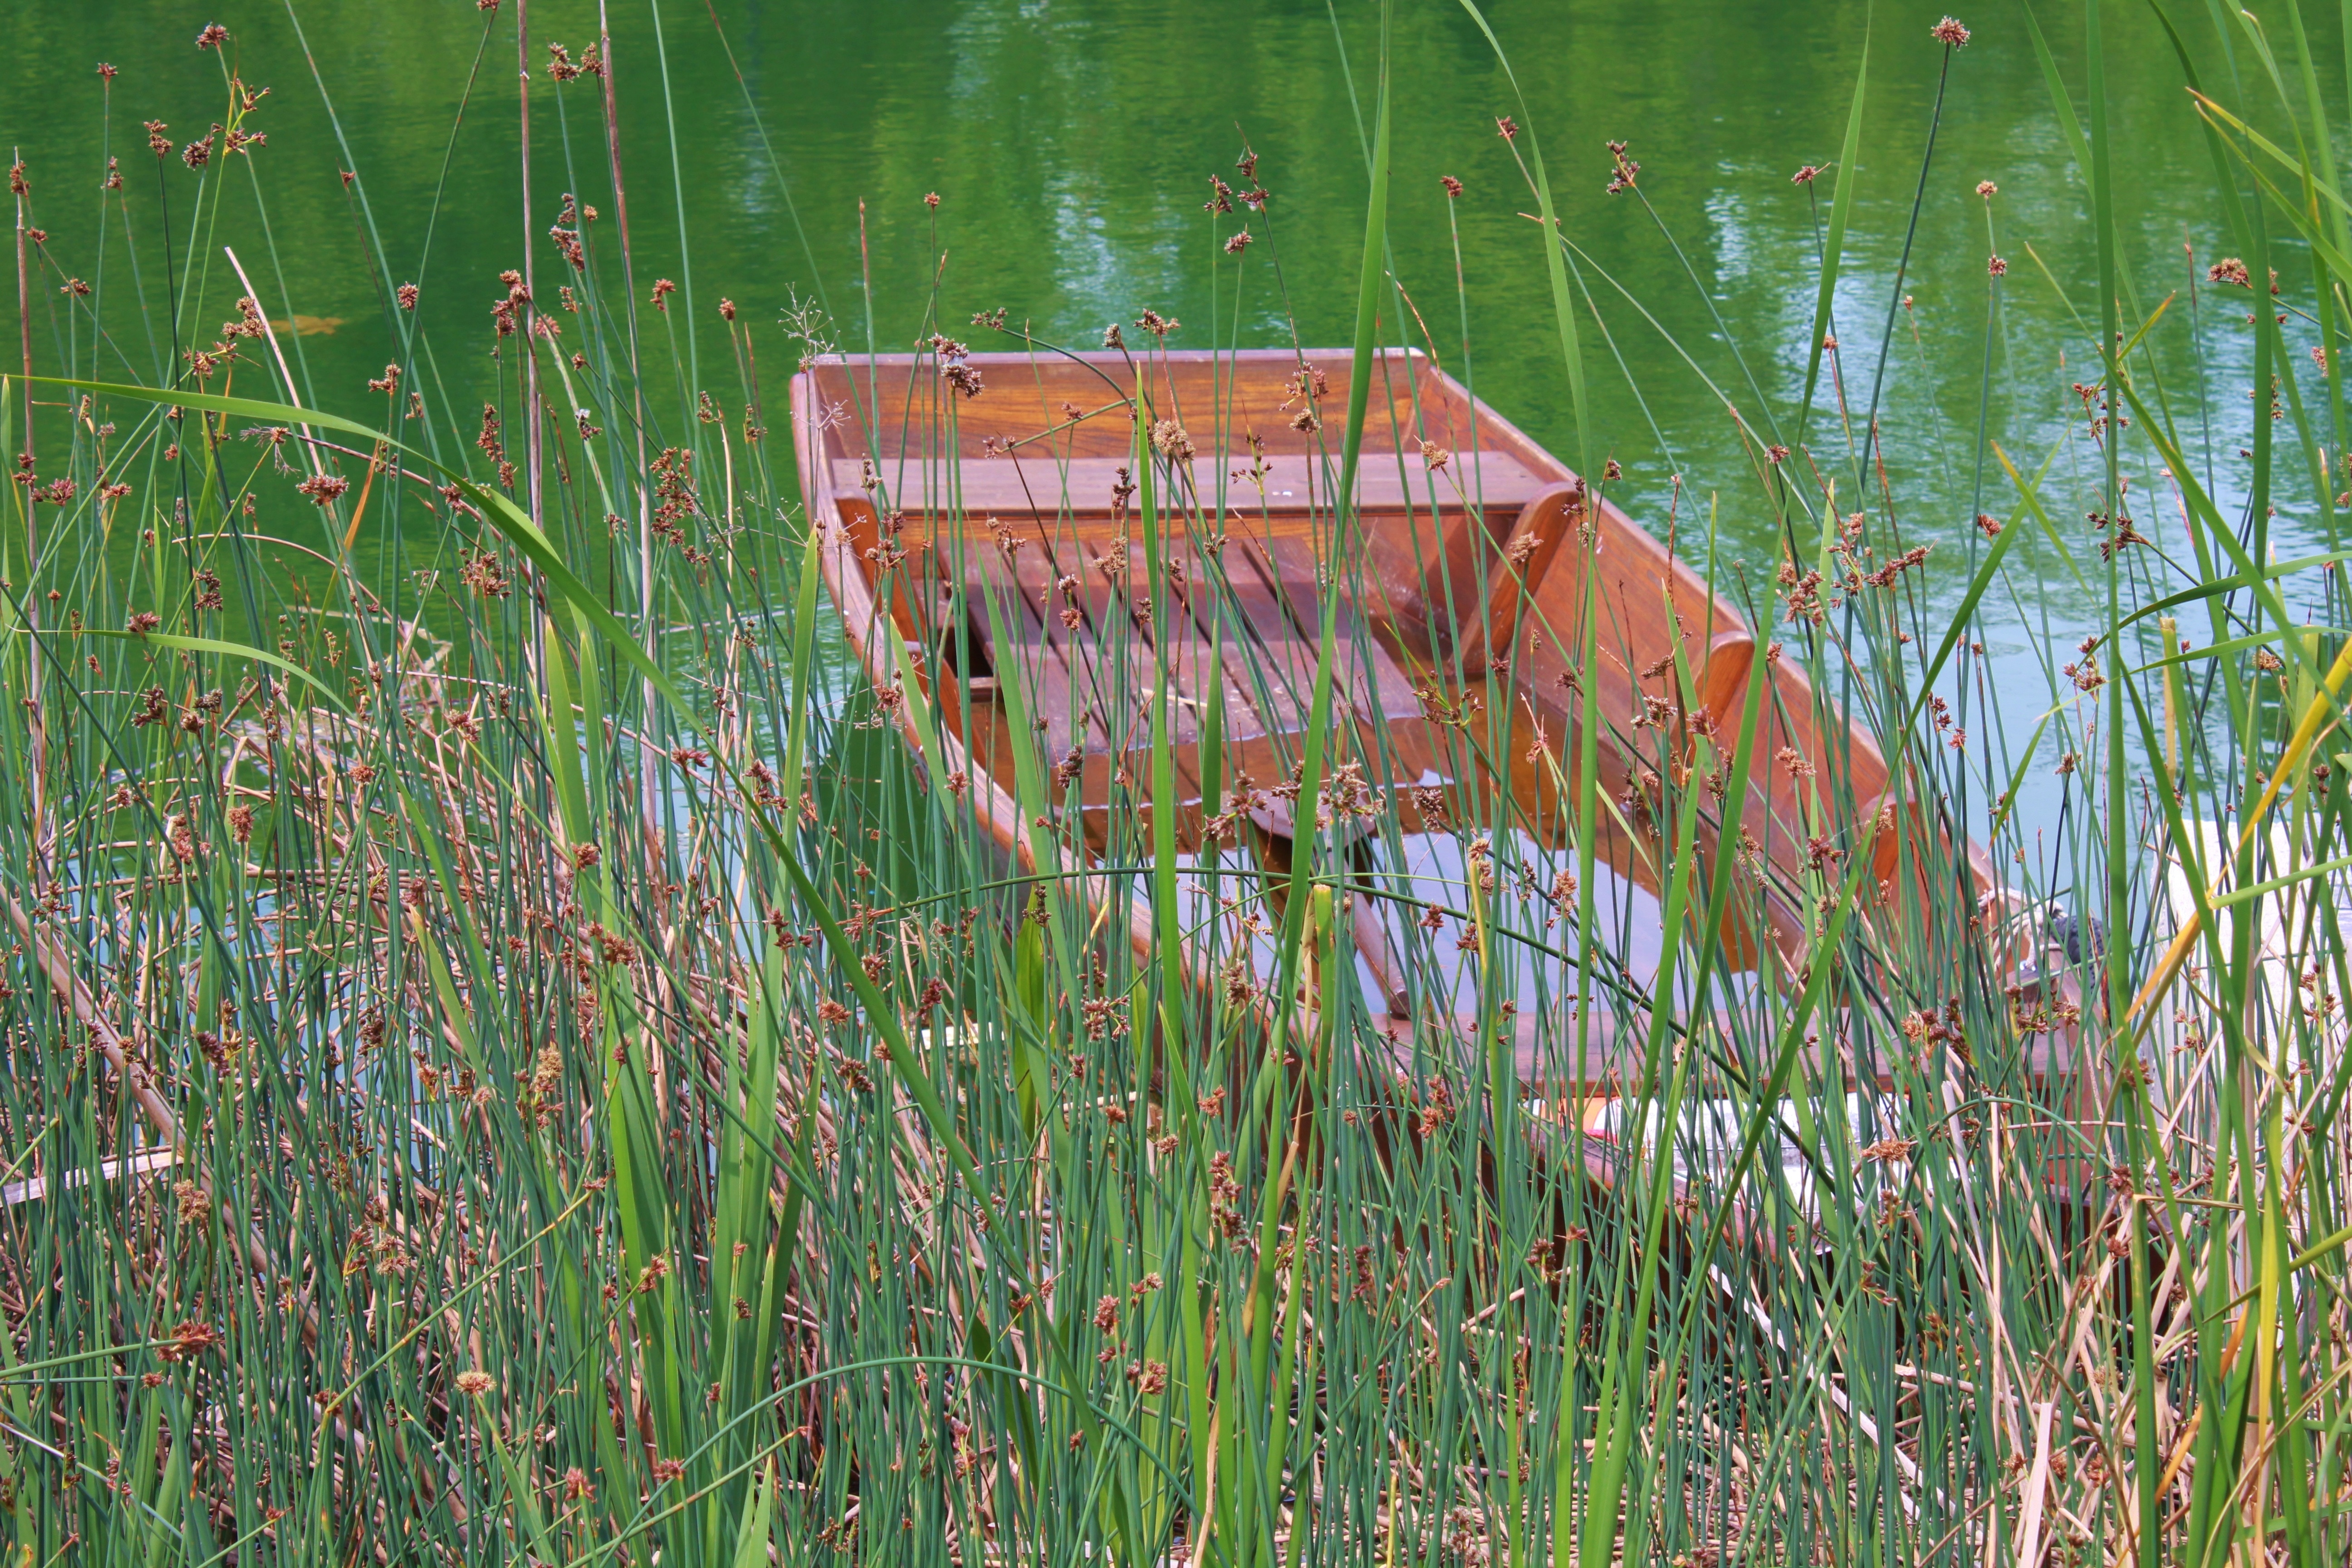 brown wooden boat